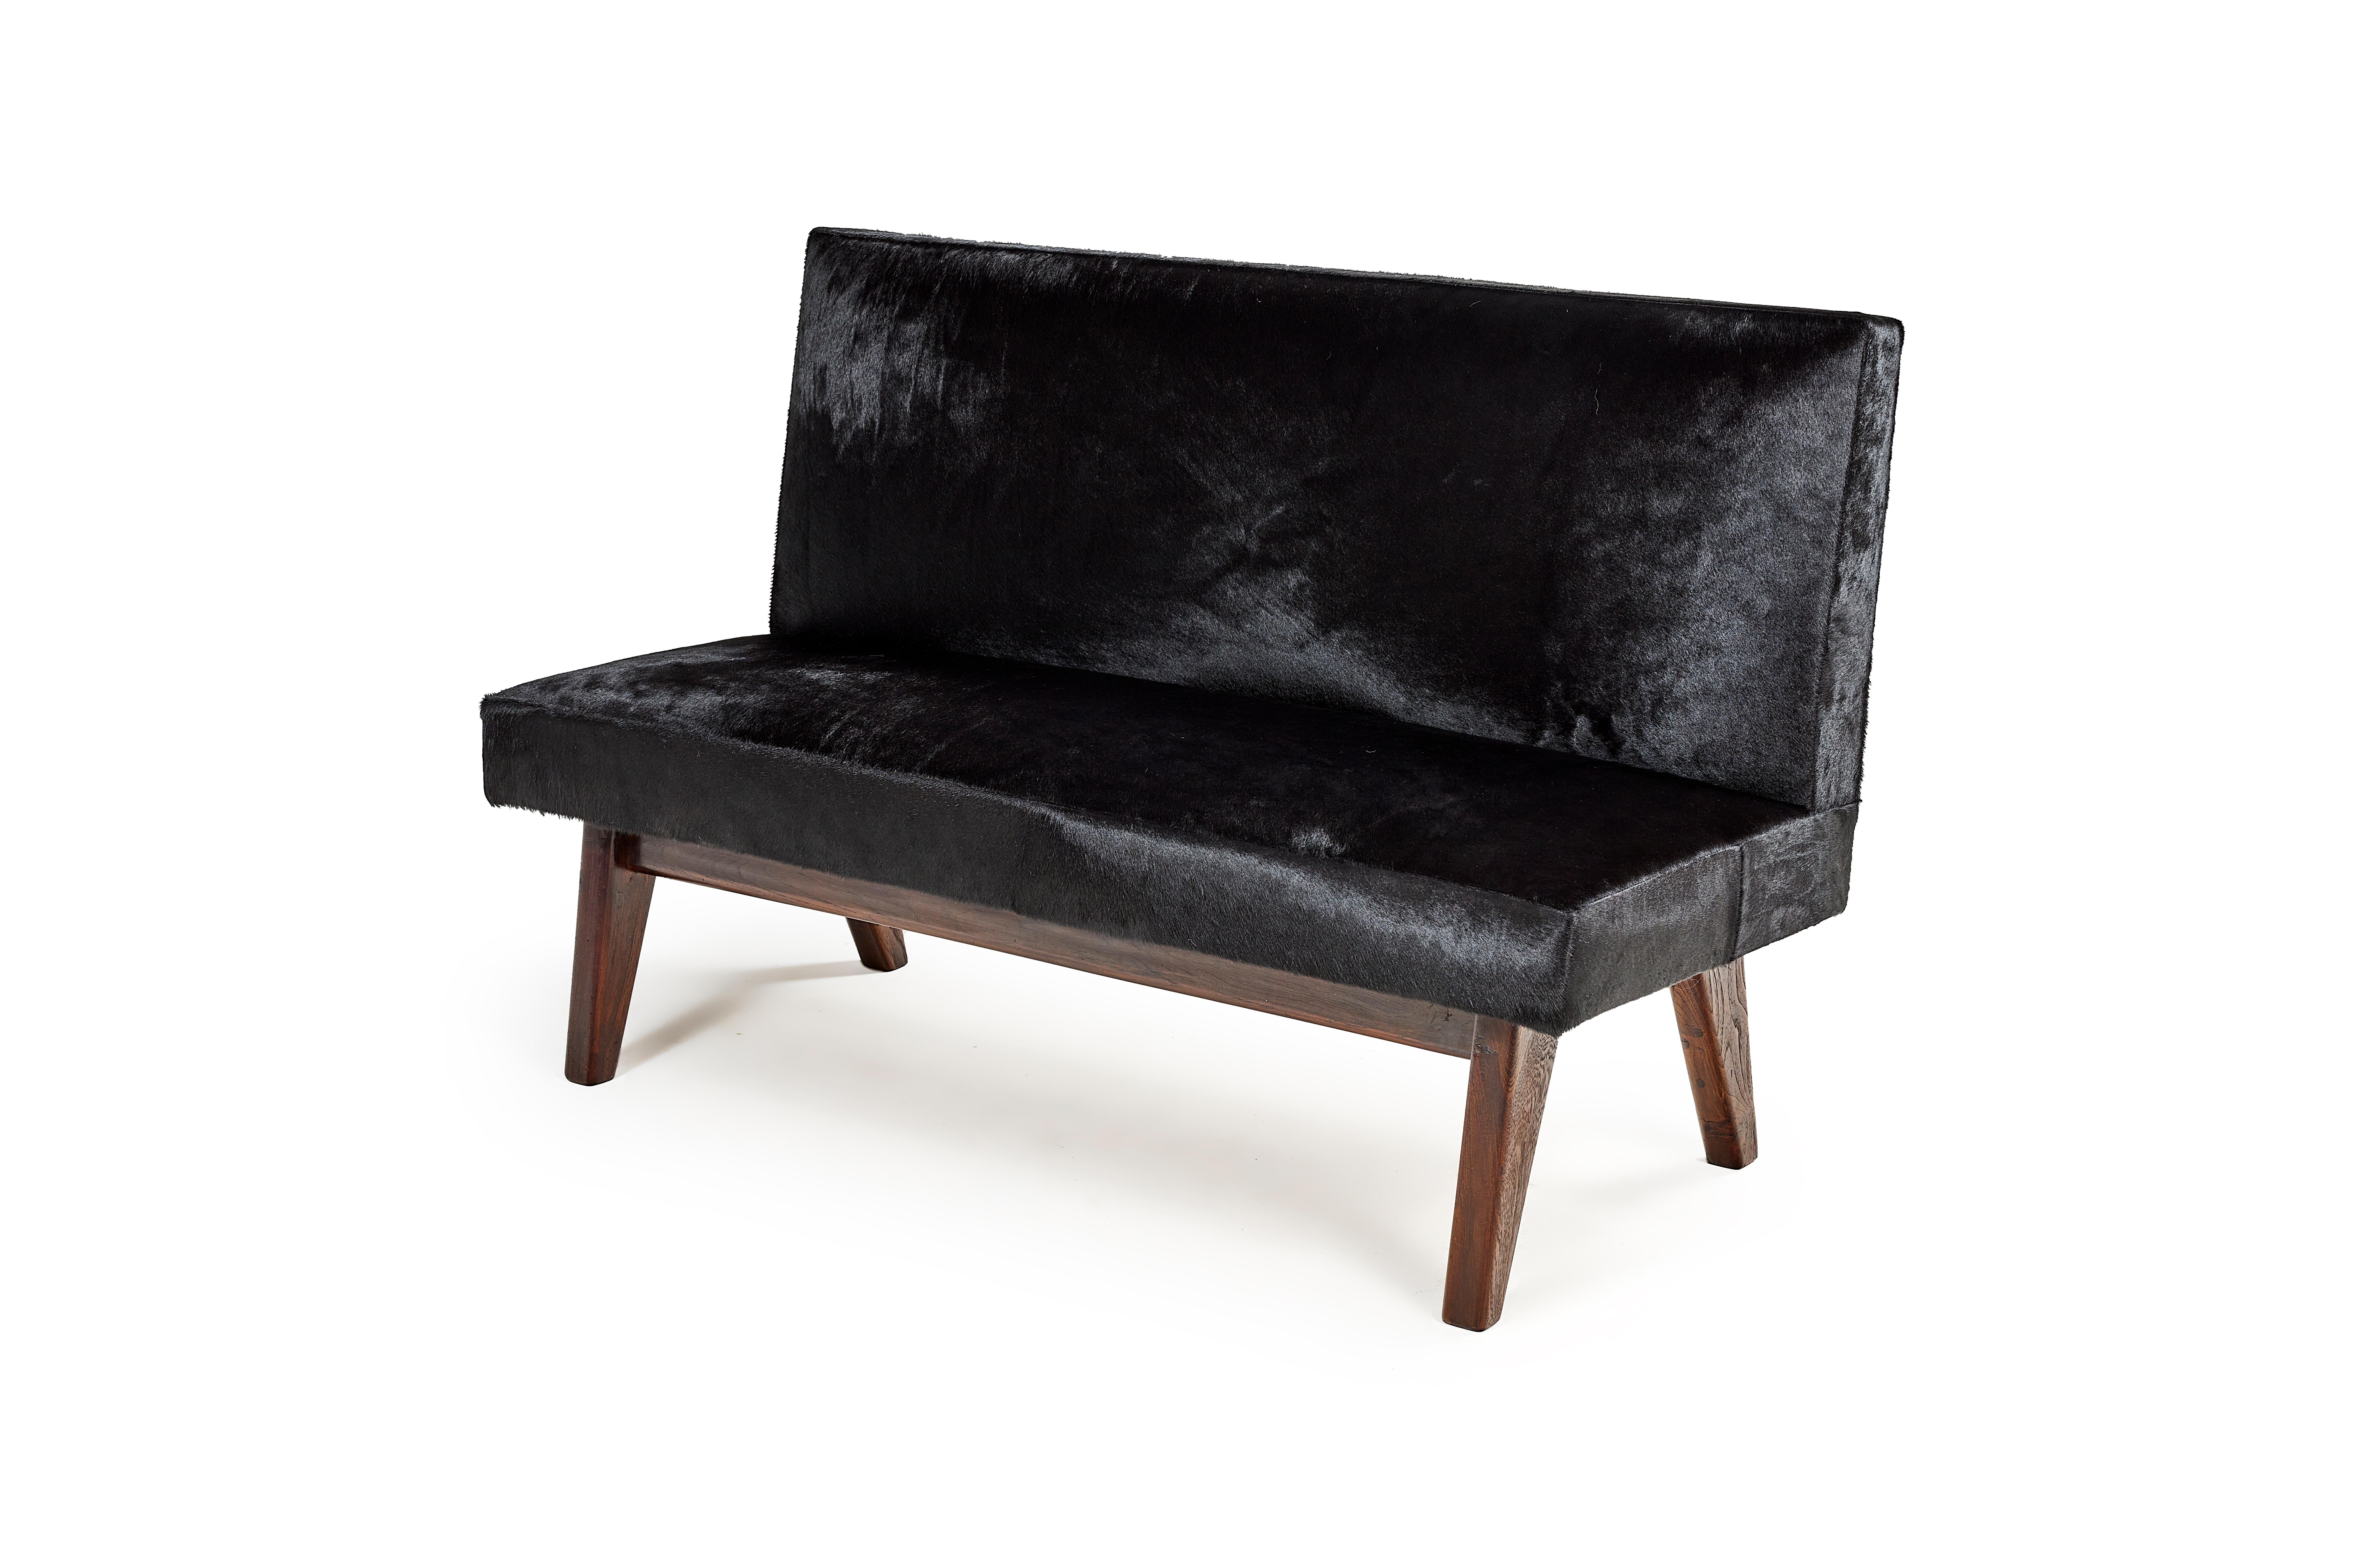 Pierre Jeanneret
PJ-SI-37-B
Important: Vintage collector's item for sale with guaranteed authenticity. 
High bench seat called “Public bench”, circa 1959-1960.
Solid teak, colored nubuk.
Bibliography: Eric Touchaleaume et Gérald Moreau, 